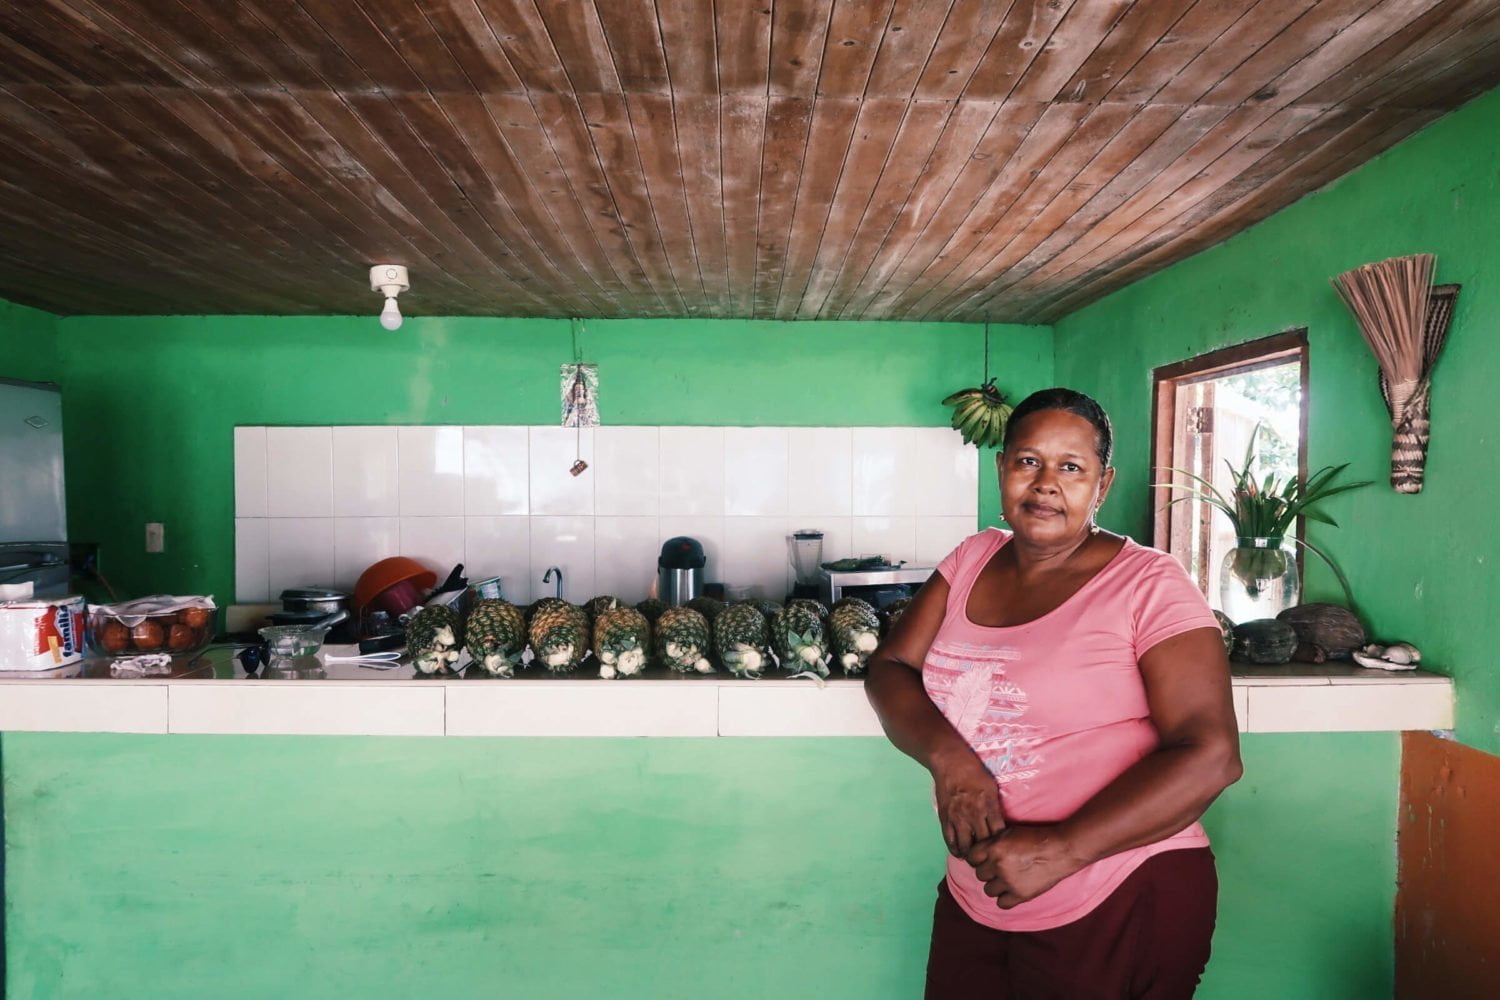 Pilar posing by her smoothie bar in El Valle, Colombia